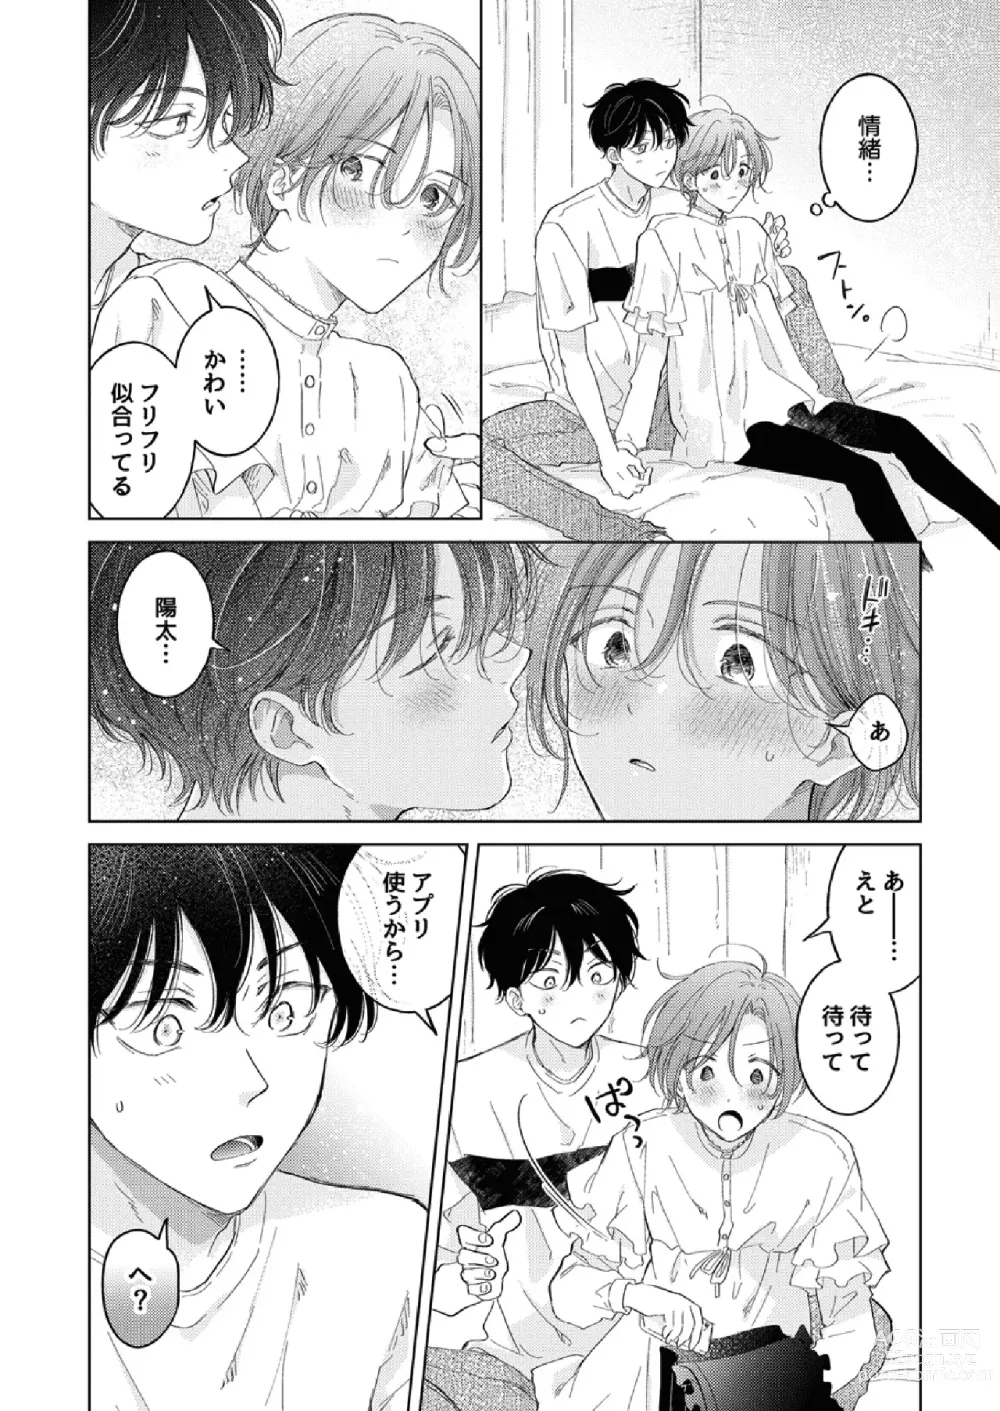 Page 12 of doujinshi How to use Gender-Changing Apps Properly 2